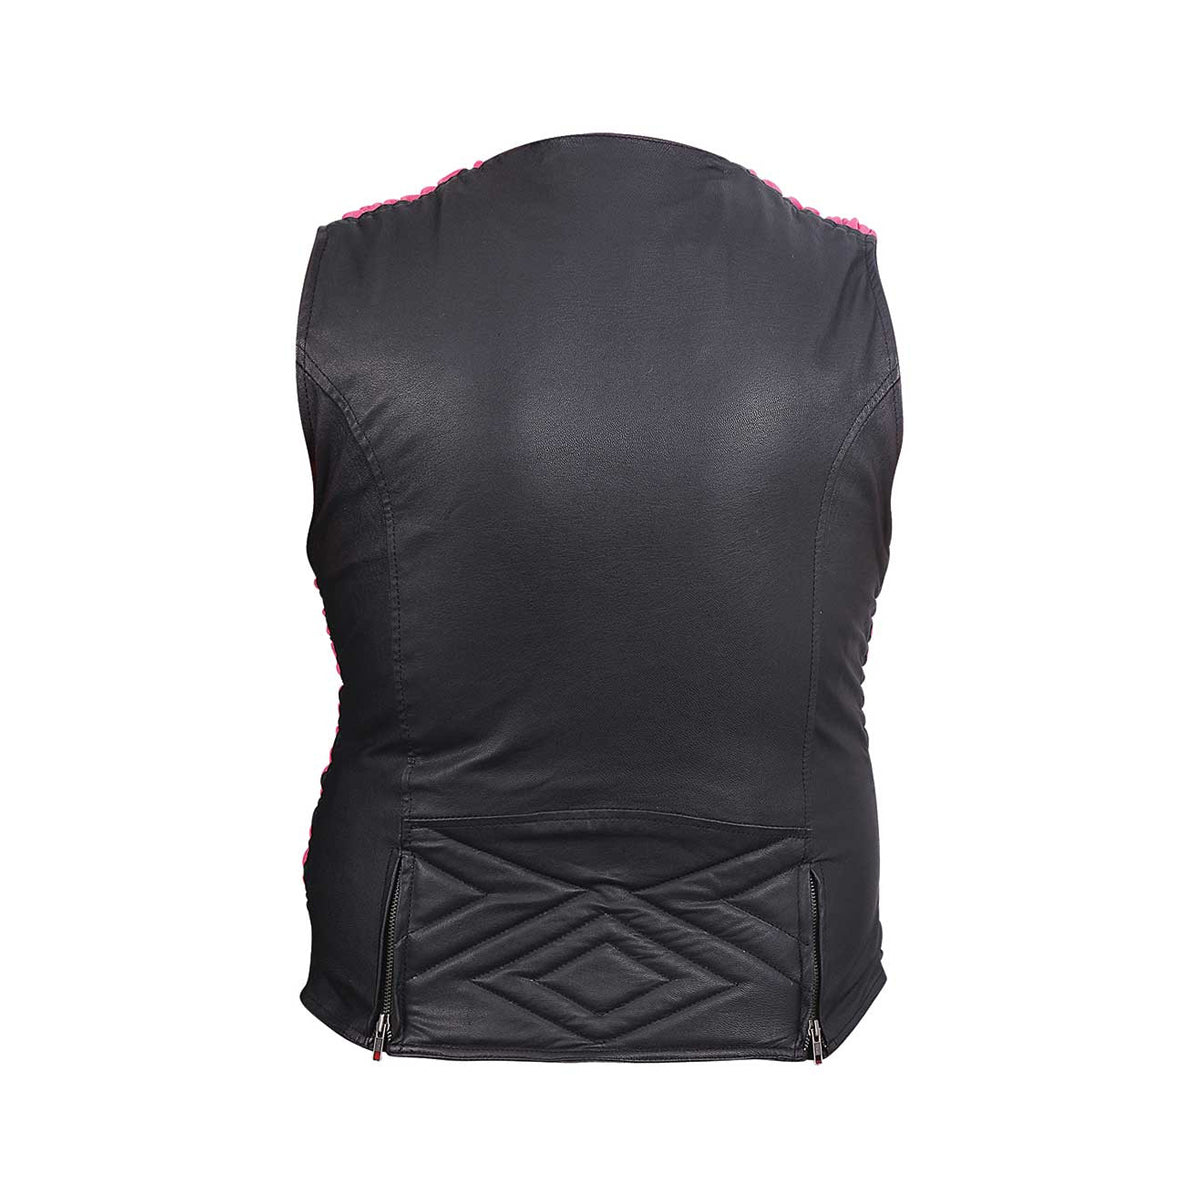 LADIES PREMIUM LEATHER VEST WITH LEATHER SCRUNCH SIDES